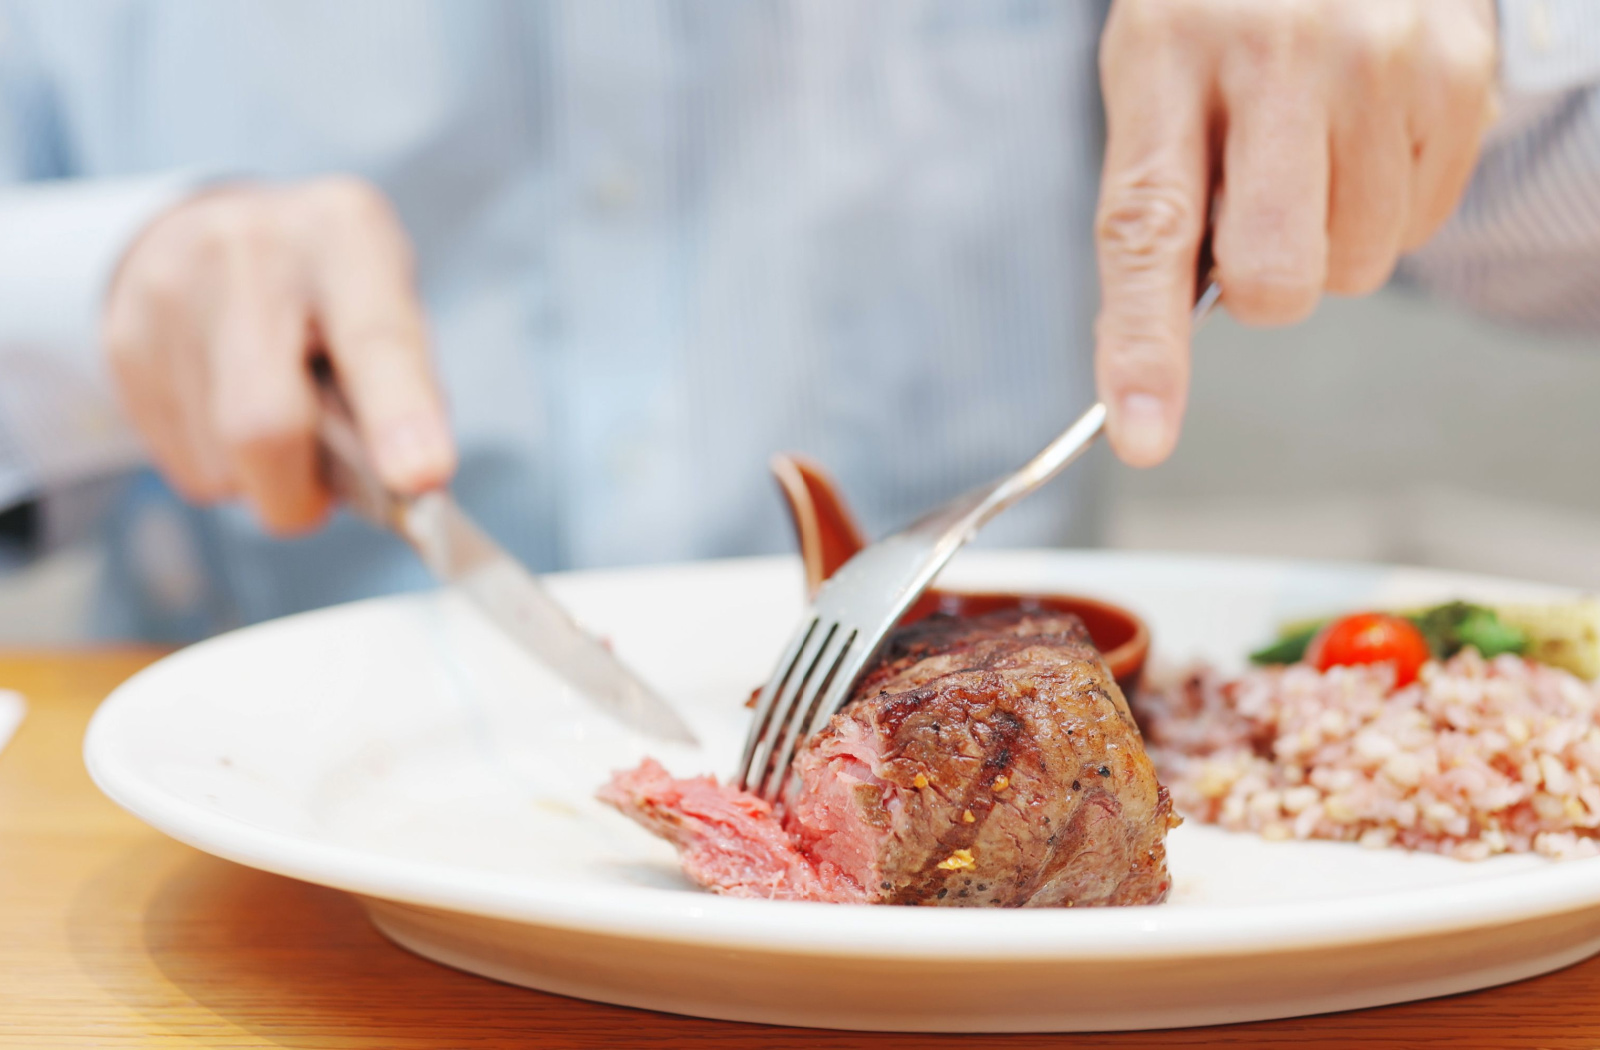 Close up of a senior man’s hand cutting a grilled steak with rice on the side of the plate.